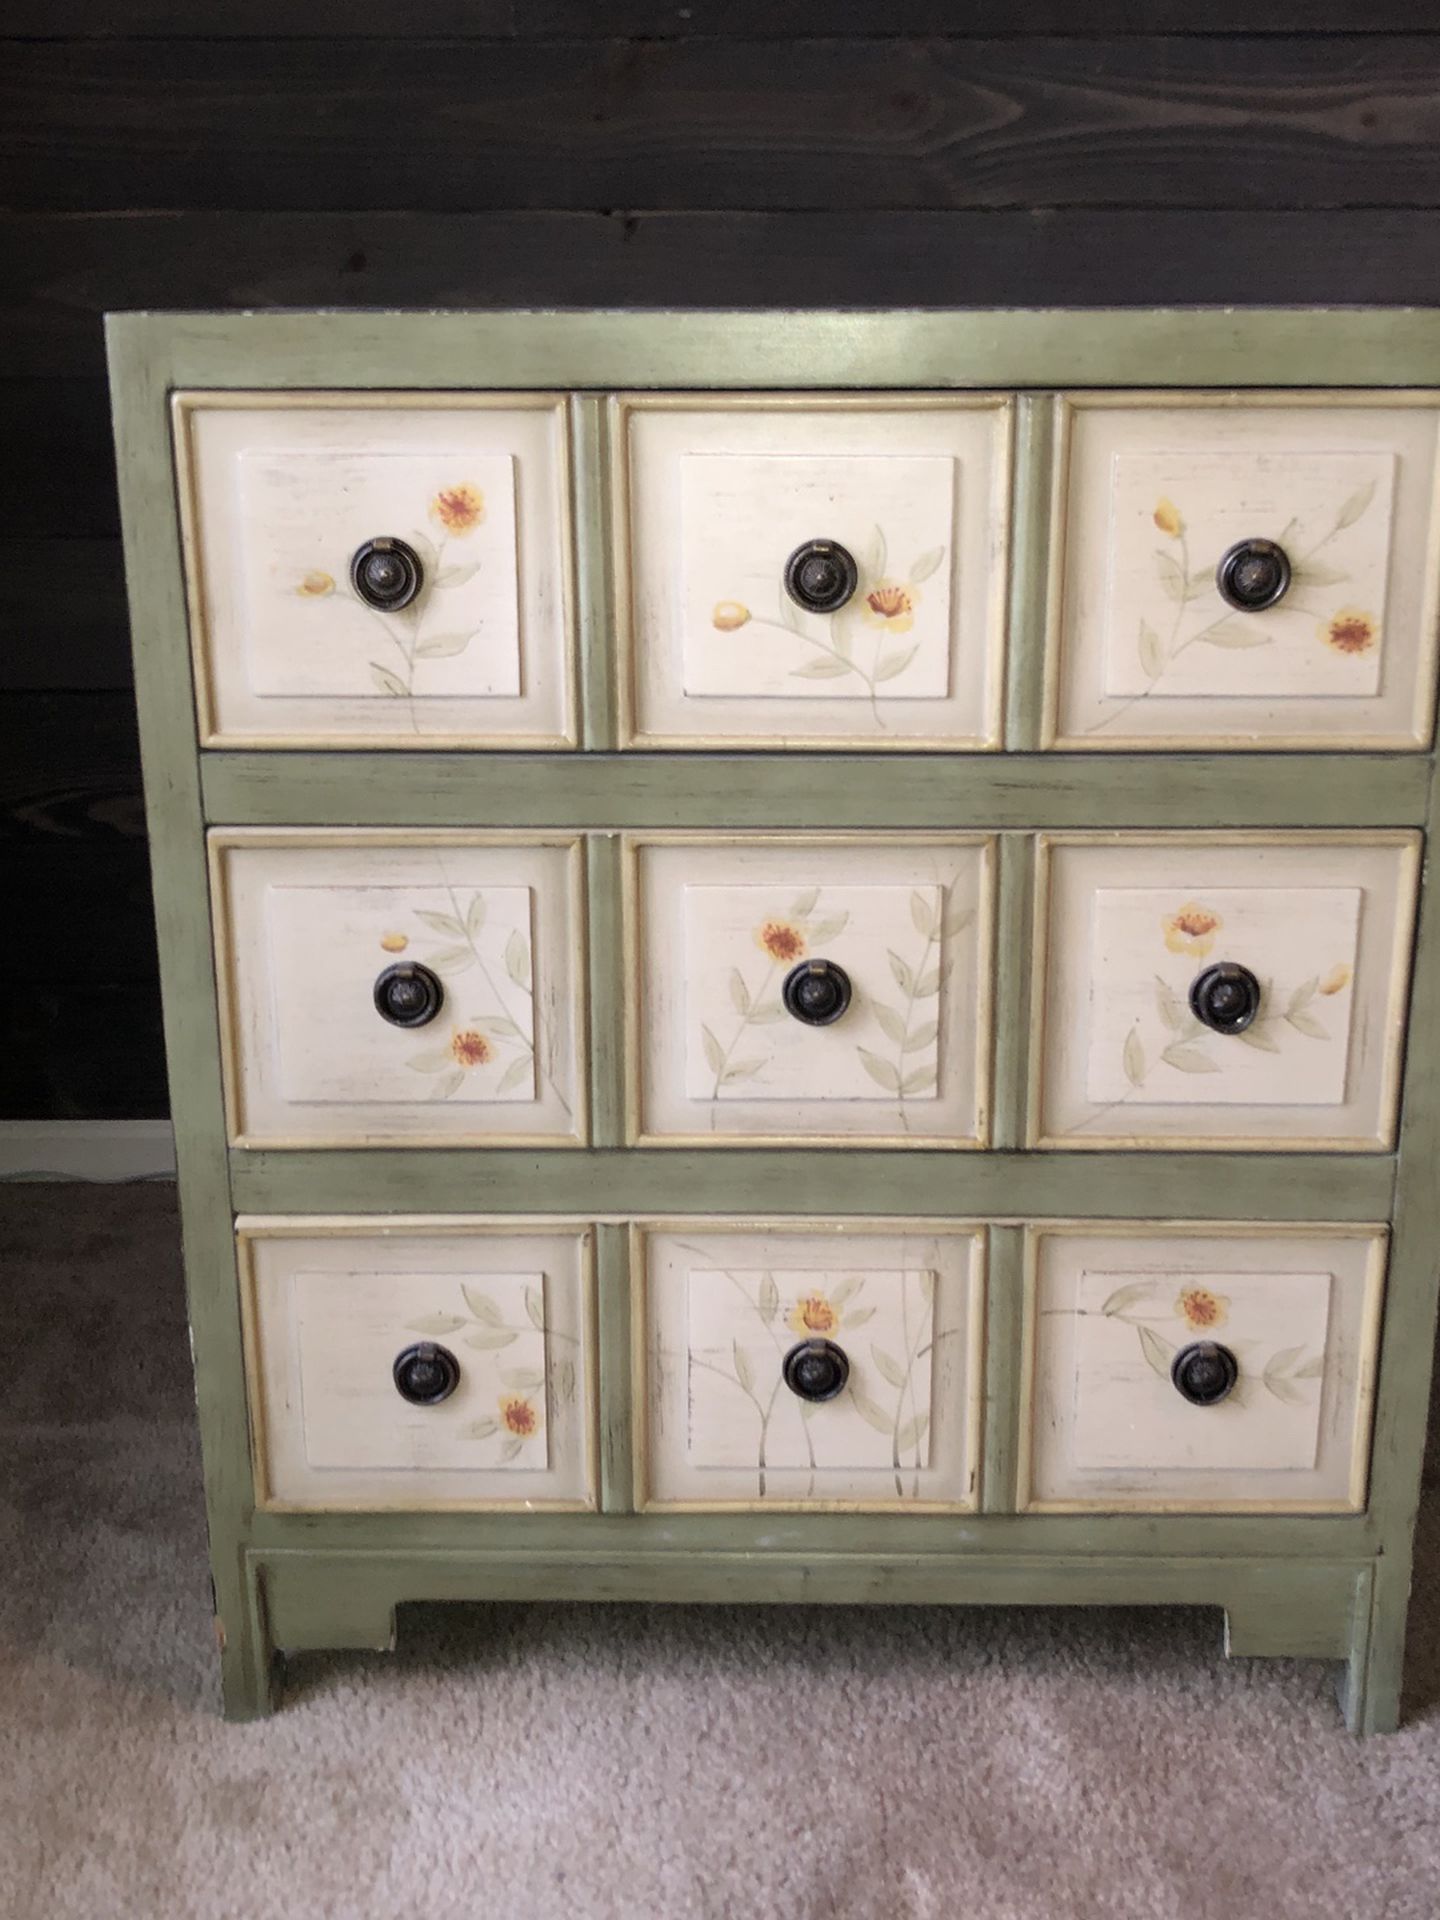 3-Drawer Chest, 26” Wide - $100